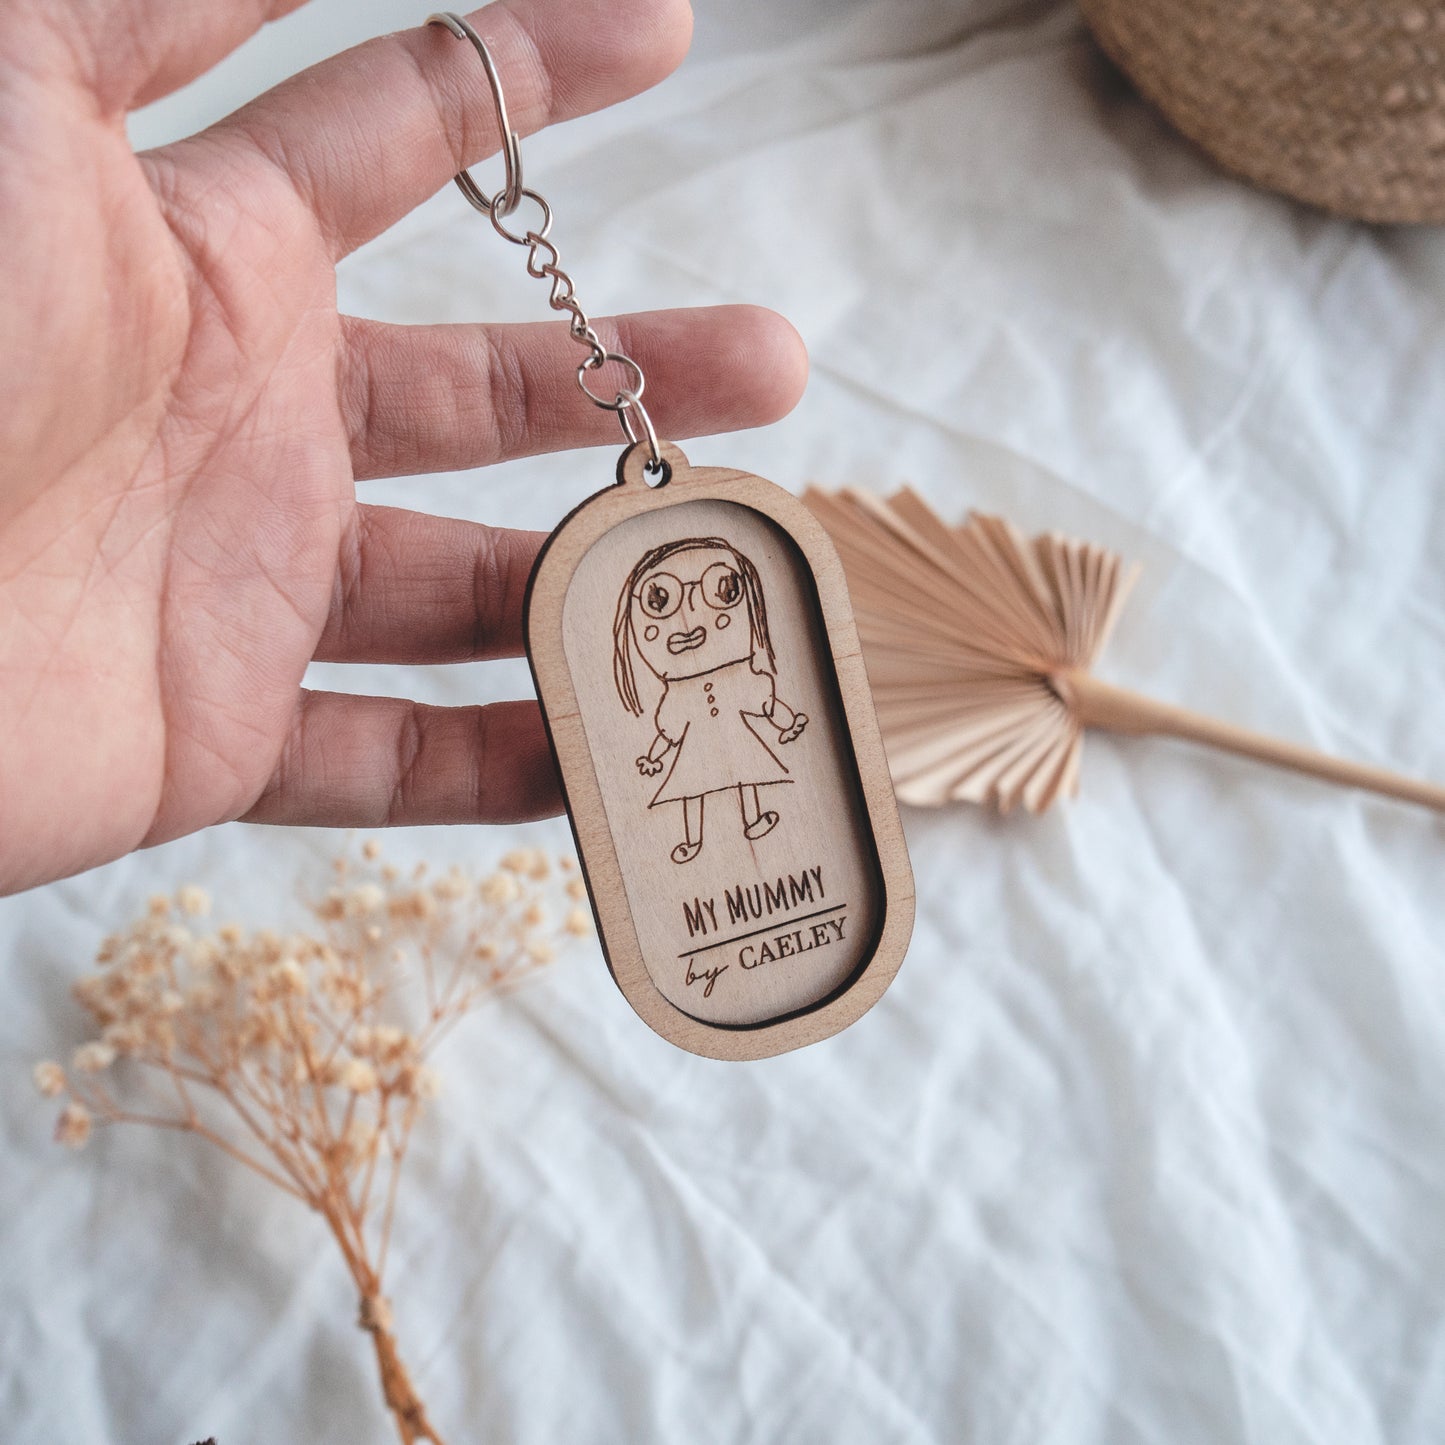 Keyring With Child's Drawing For Mother's Day